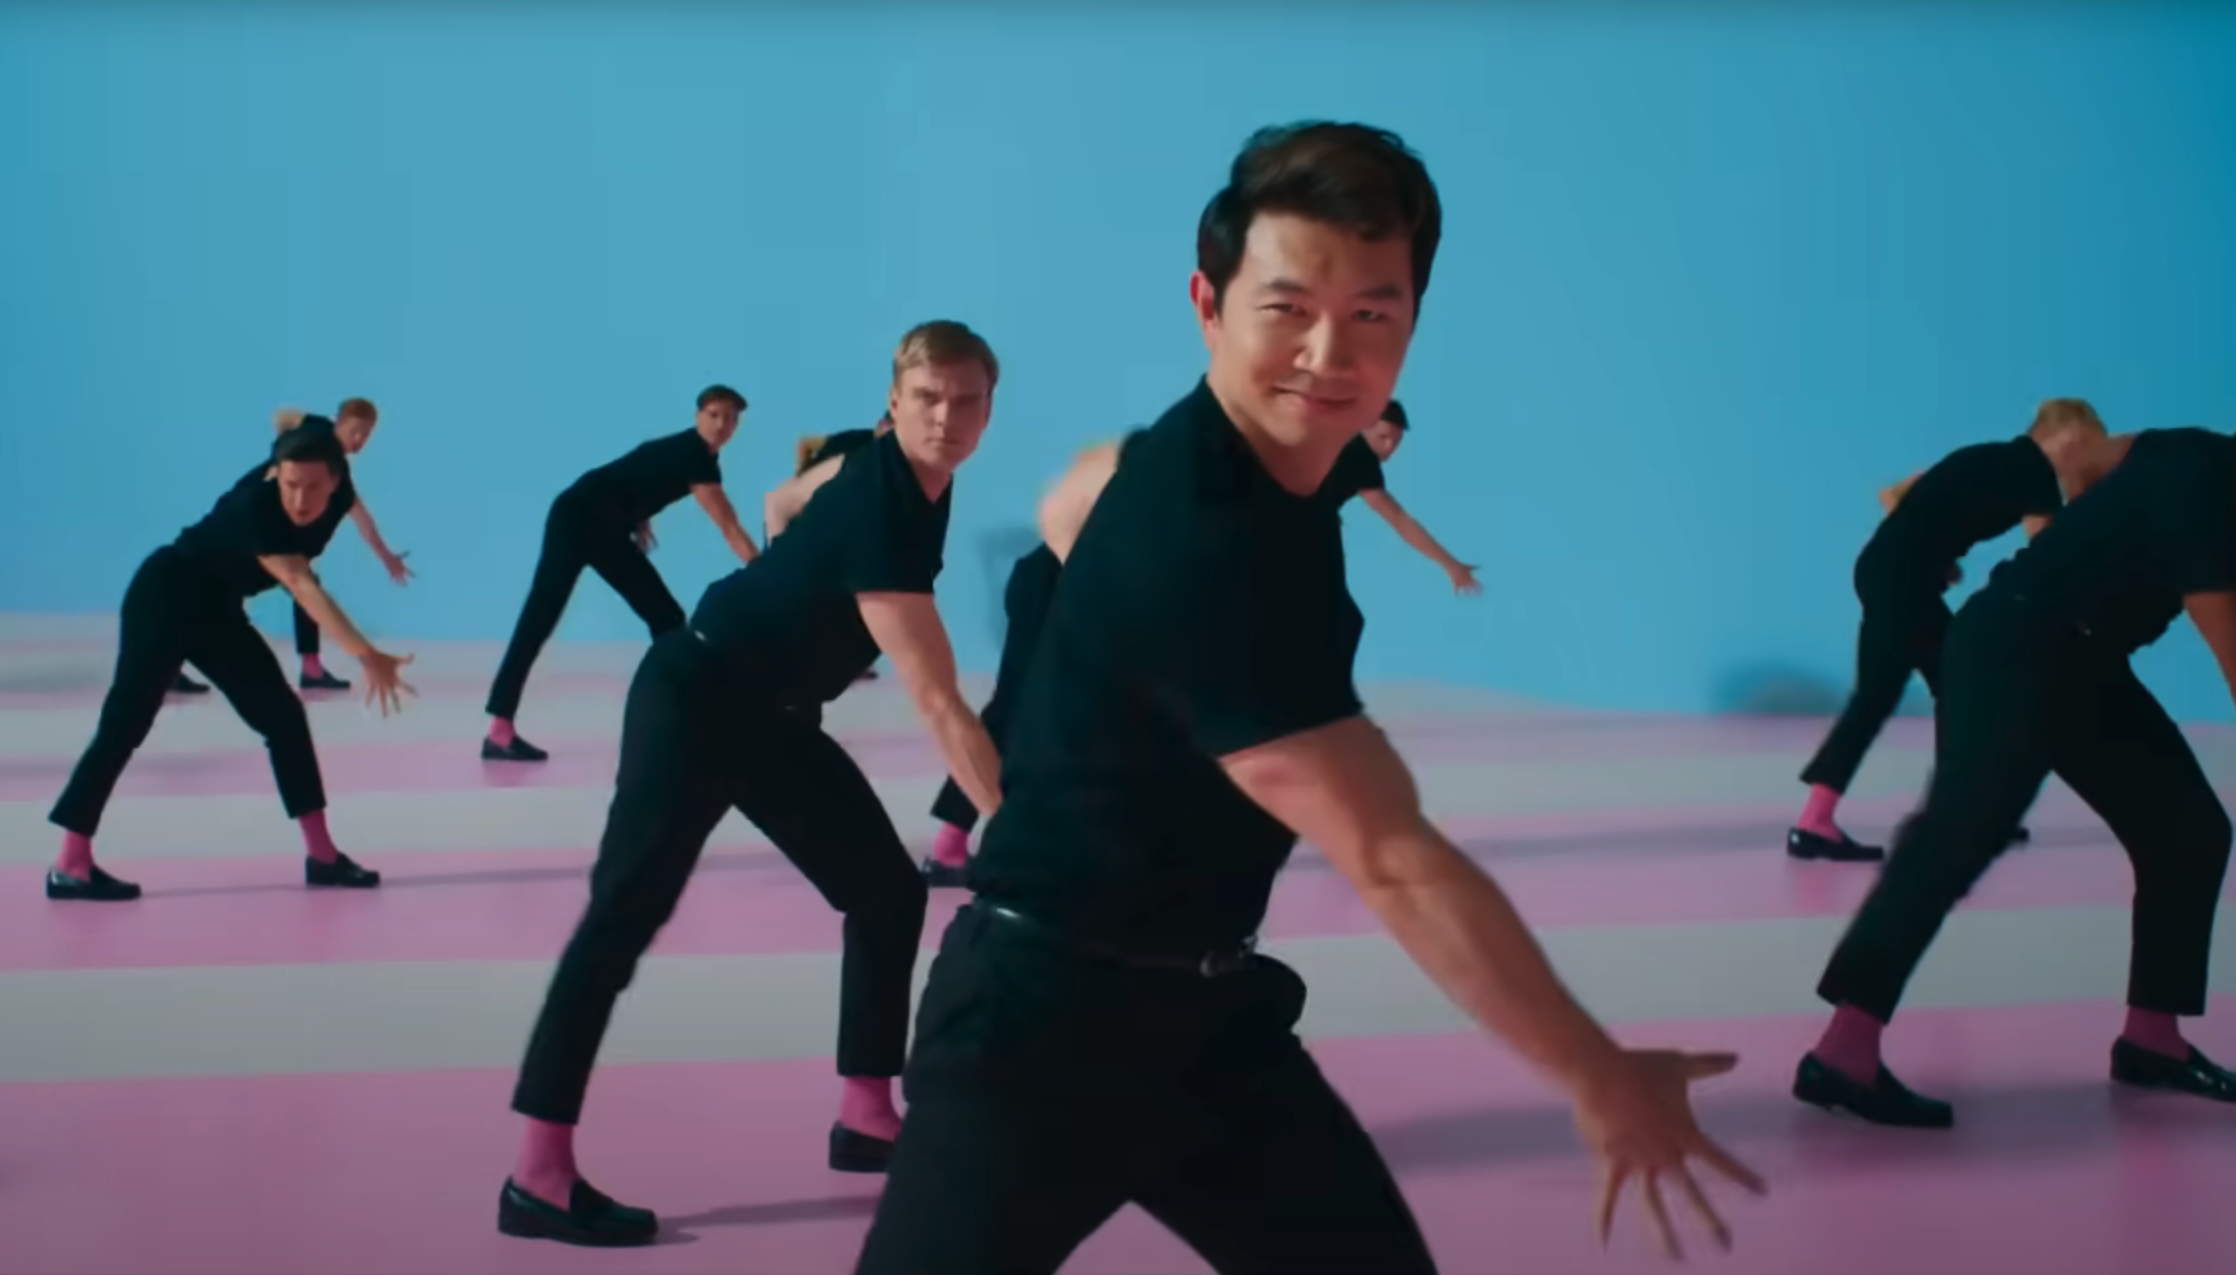 Men dance in matching outfits on a pink and blue background